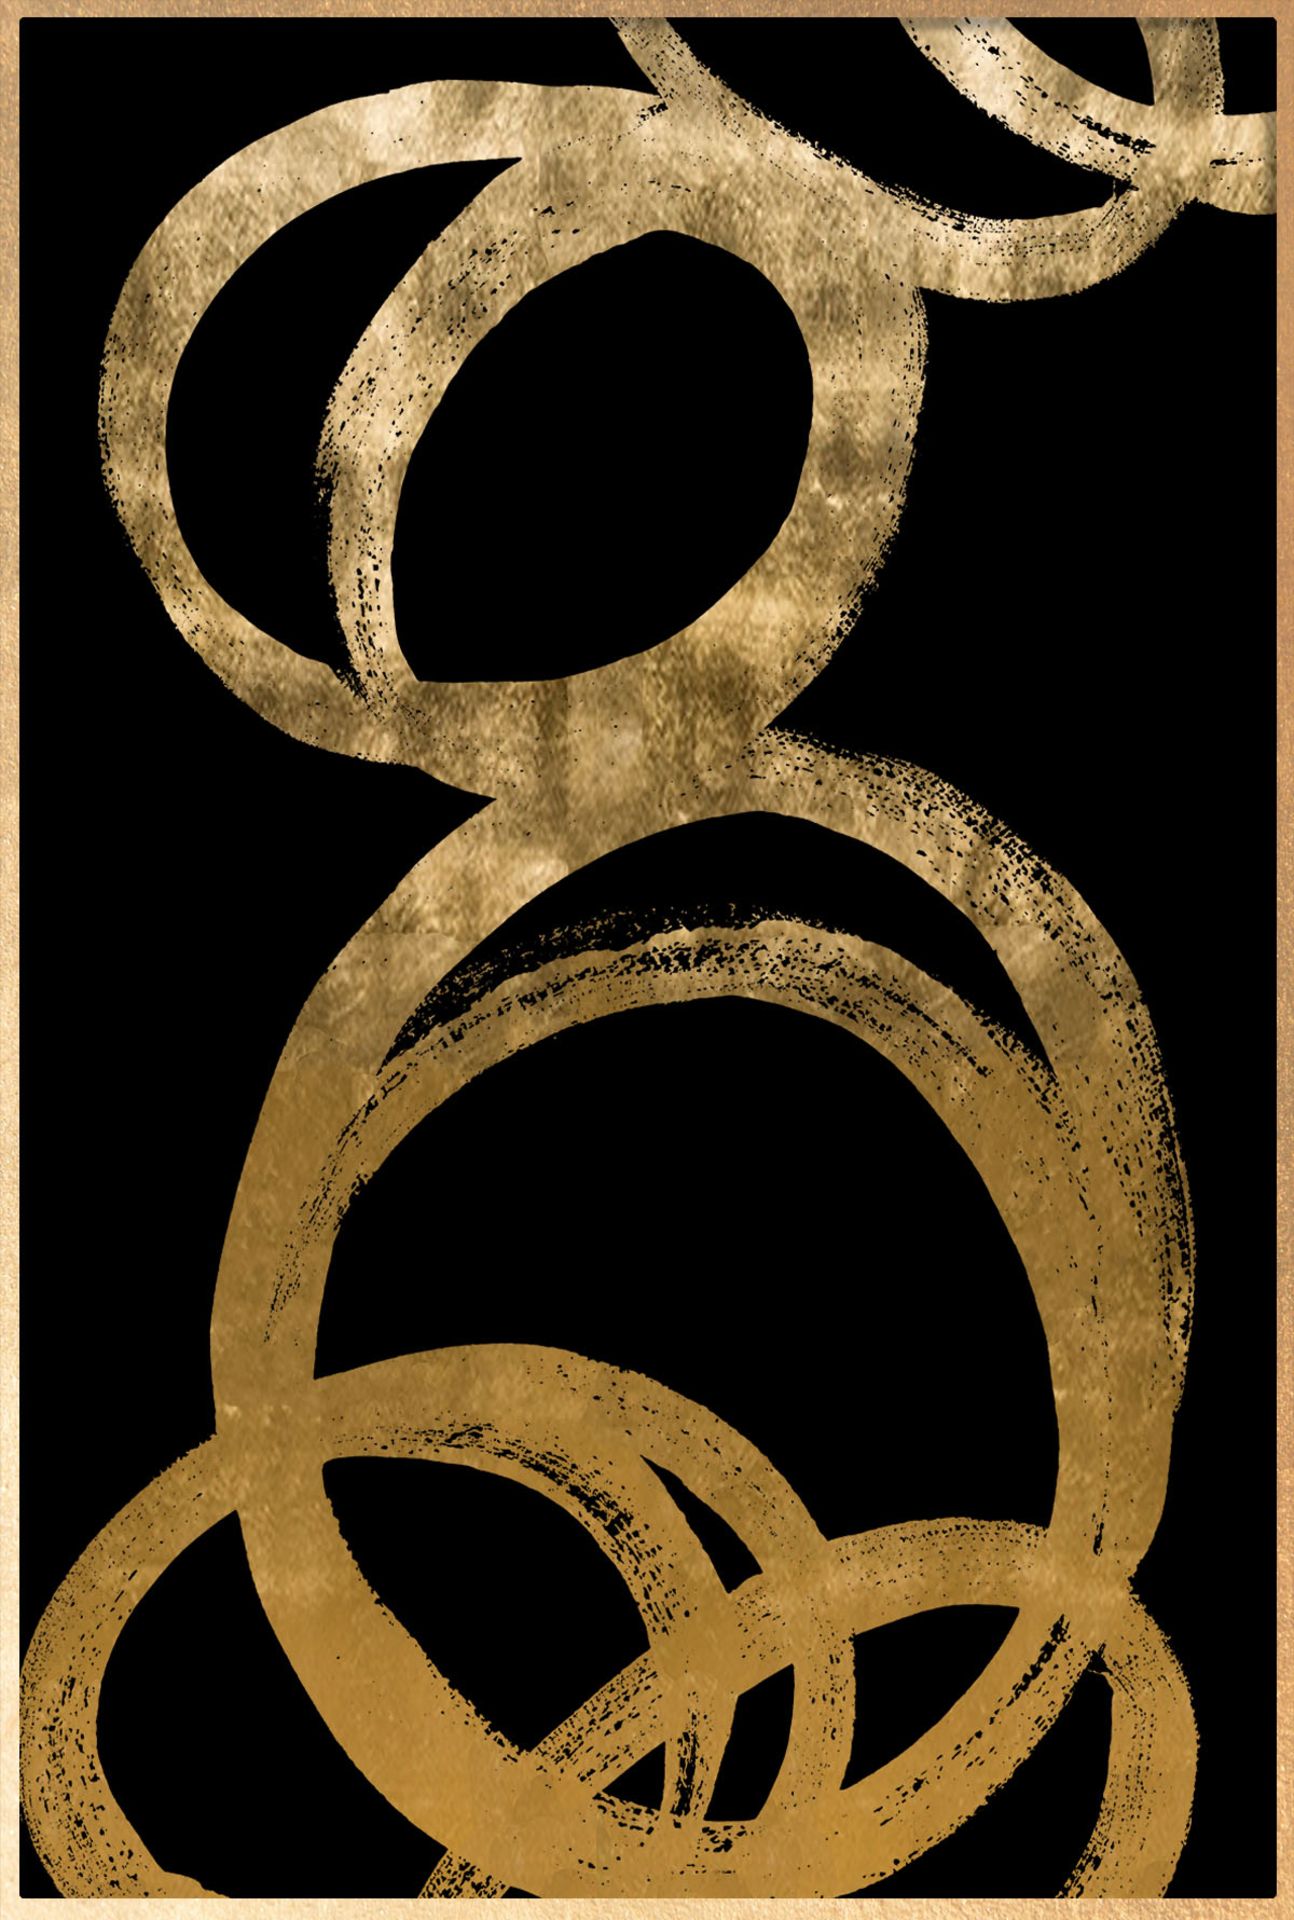 Zen Image 1 by Kesterport Artwork print on paper with acrylic pane .Aluminium frame in antique - Image 4 of 4